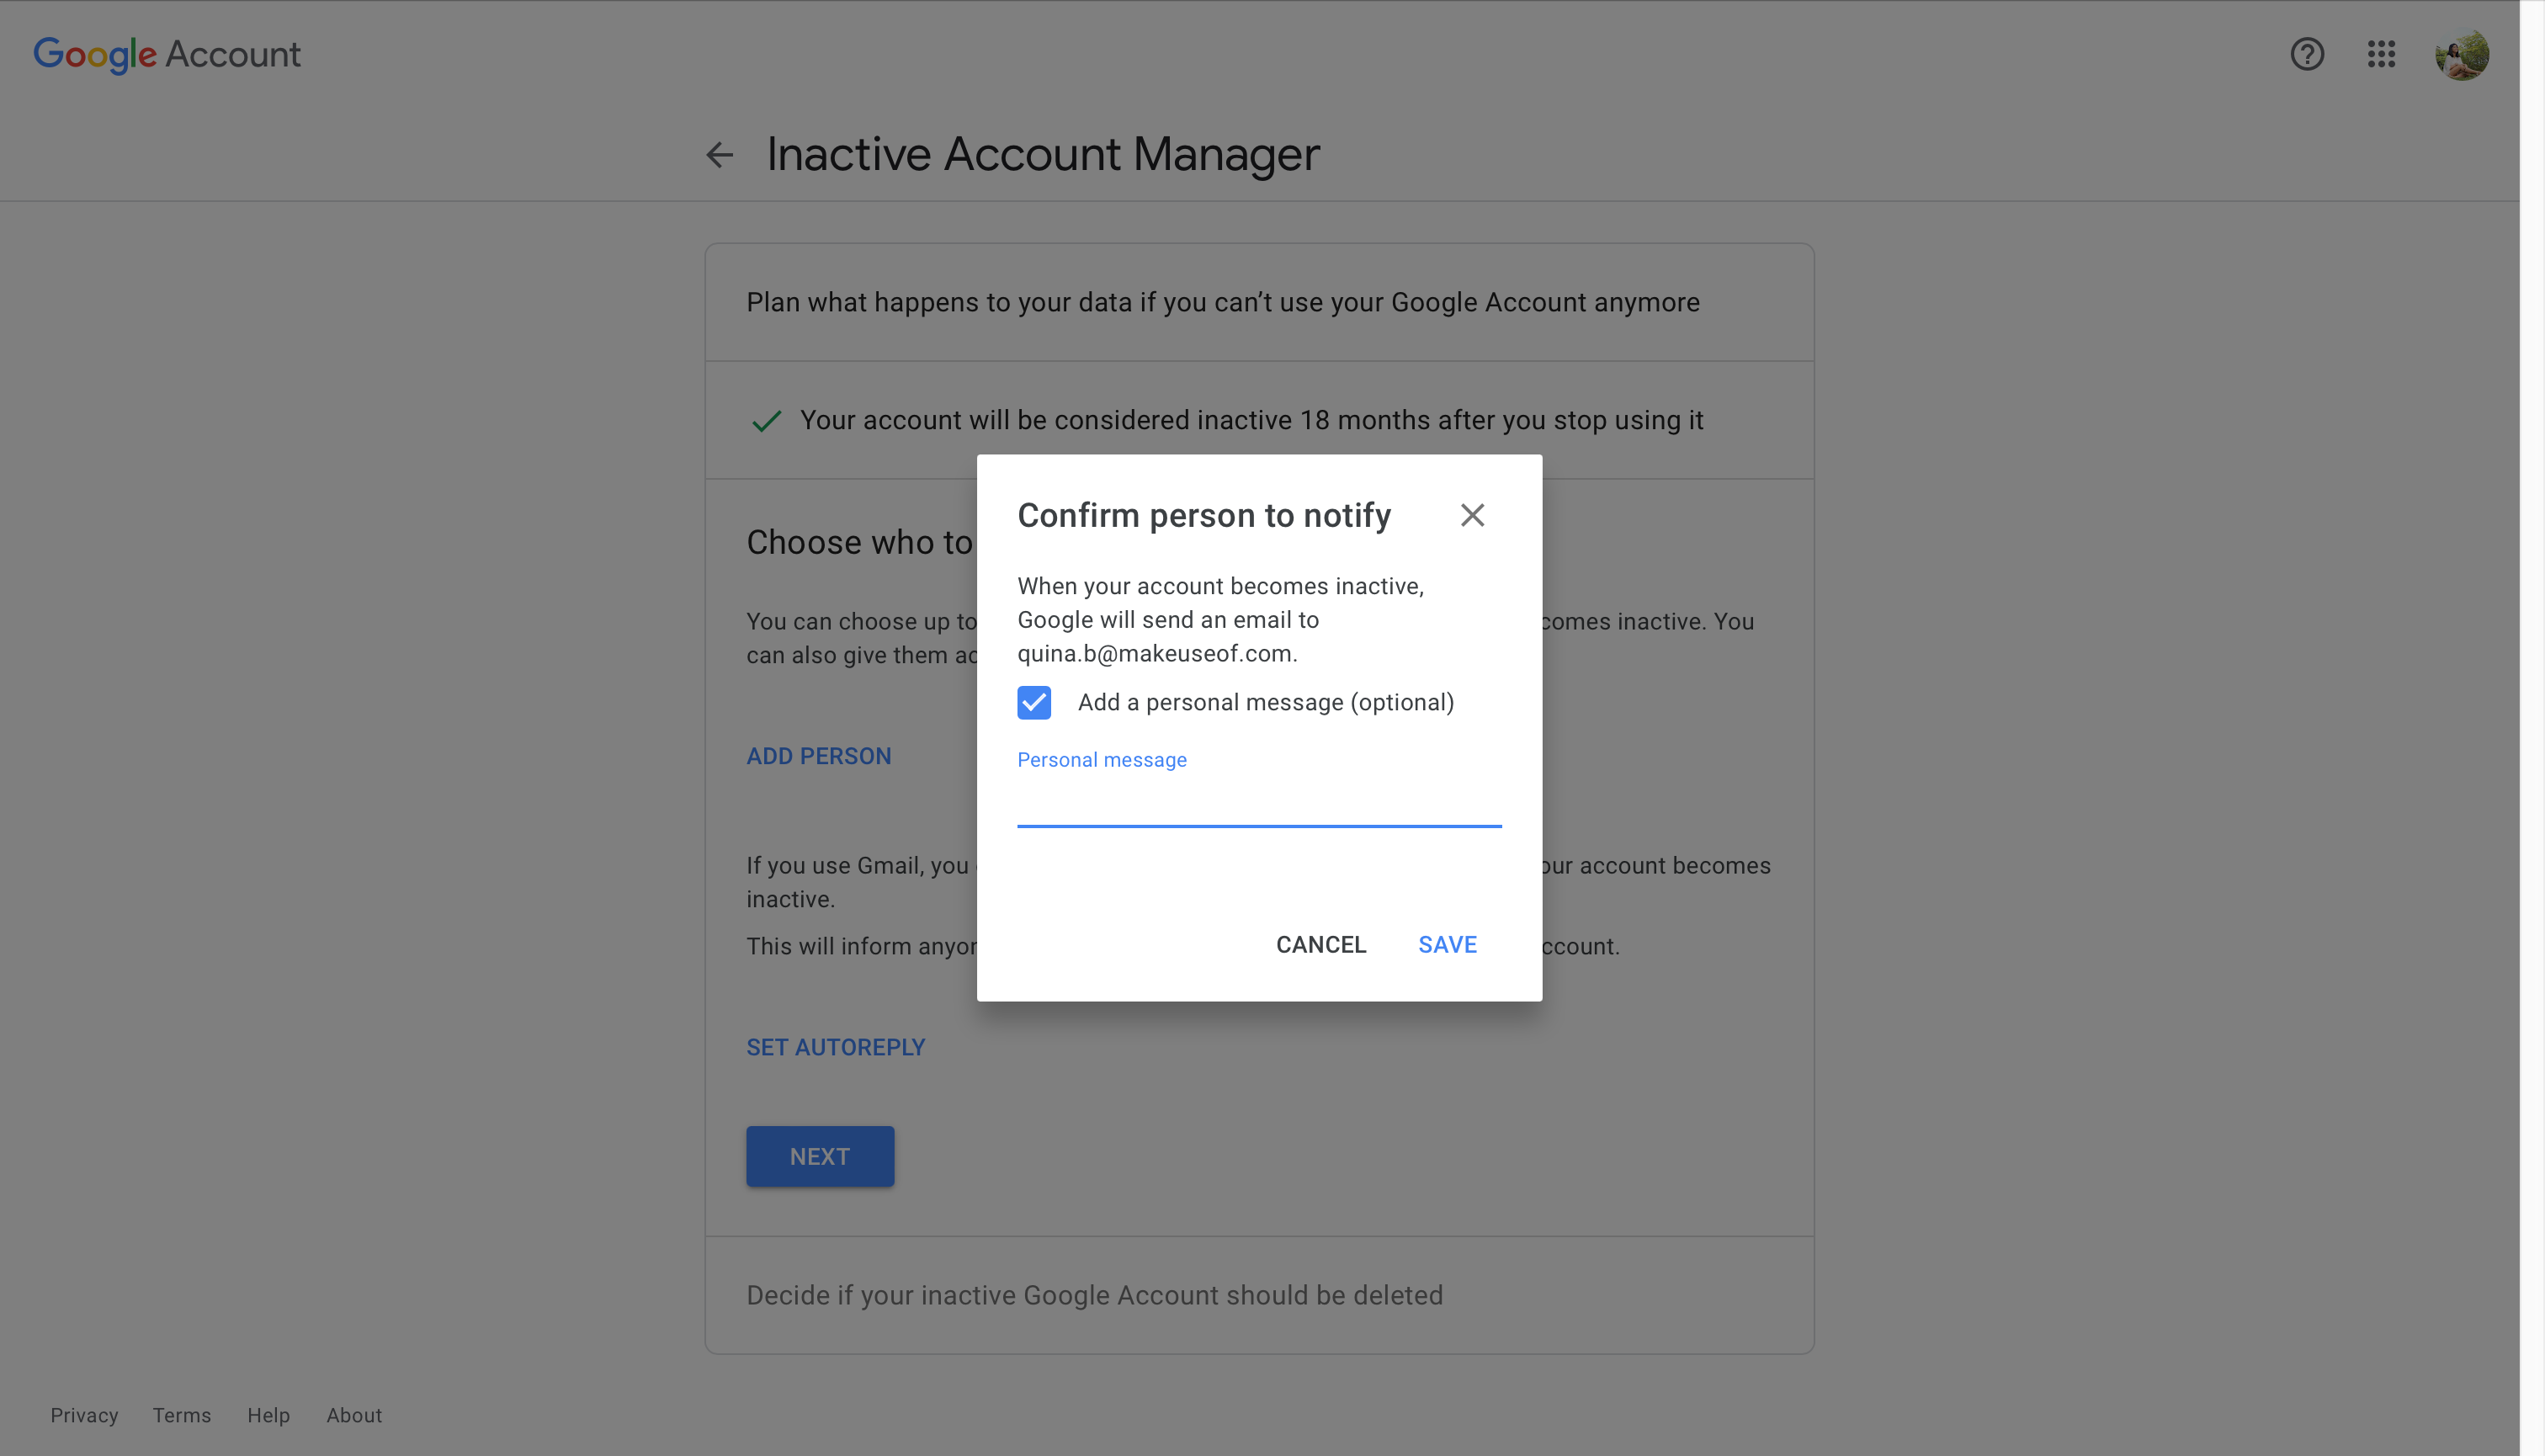 Confirm person to notify of inactive account manager